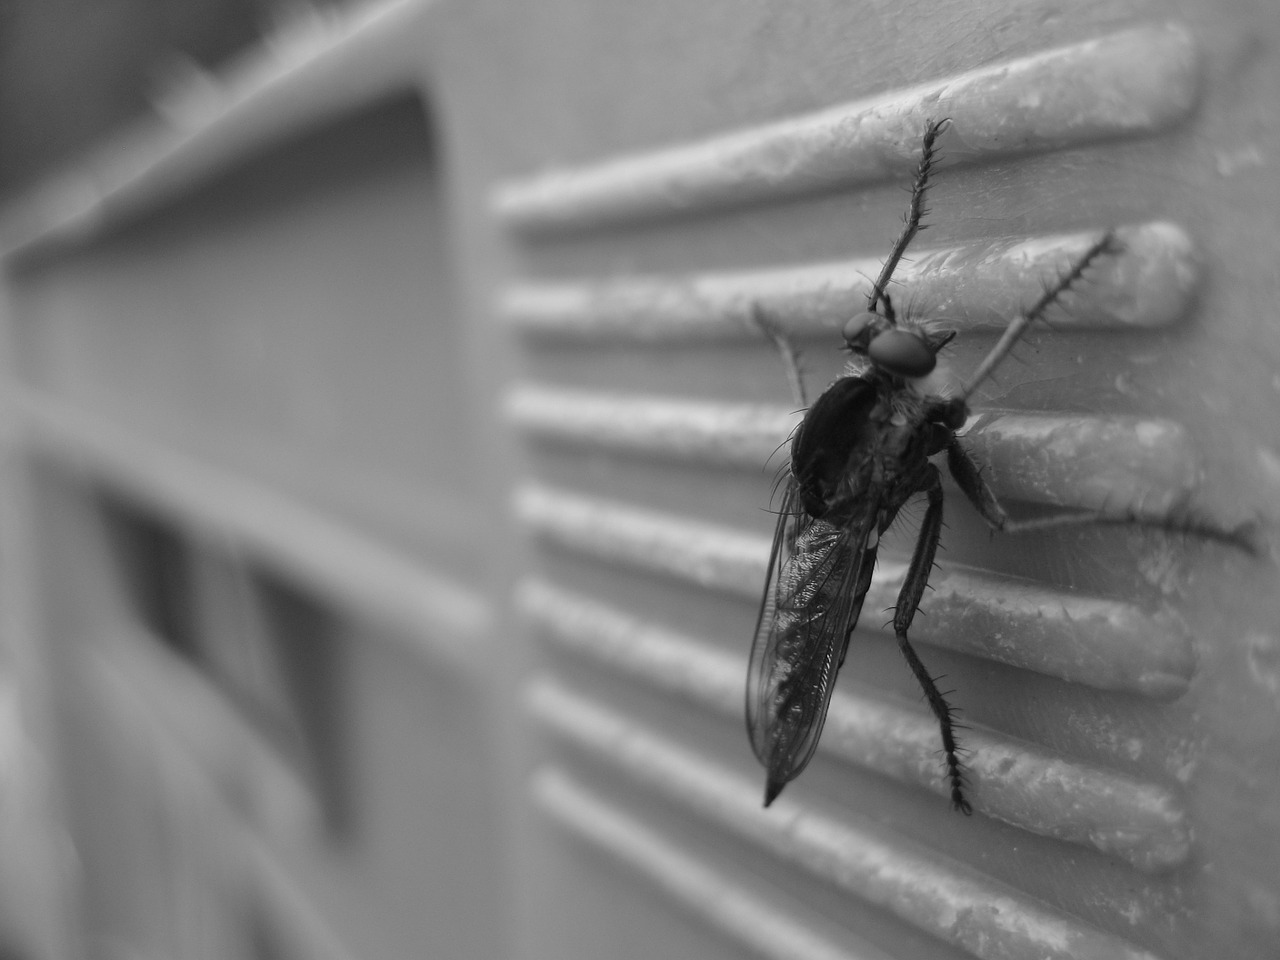 Securing Your Family from Pesky Pests in Your Home